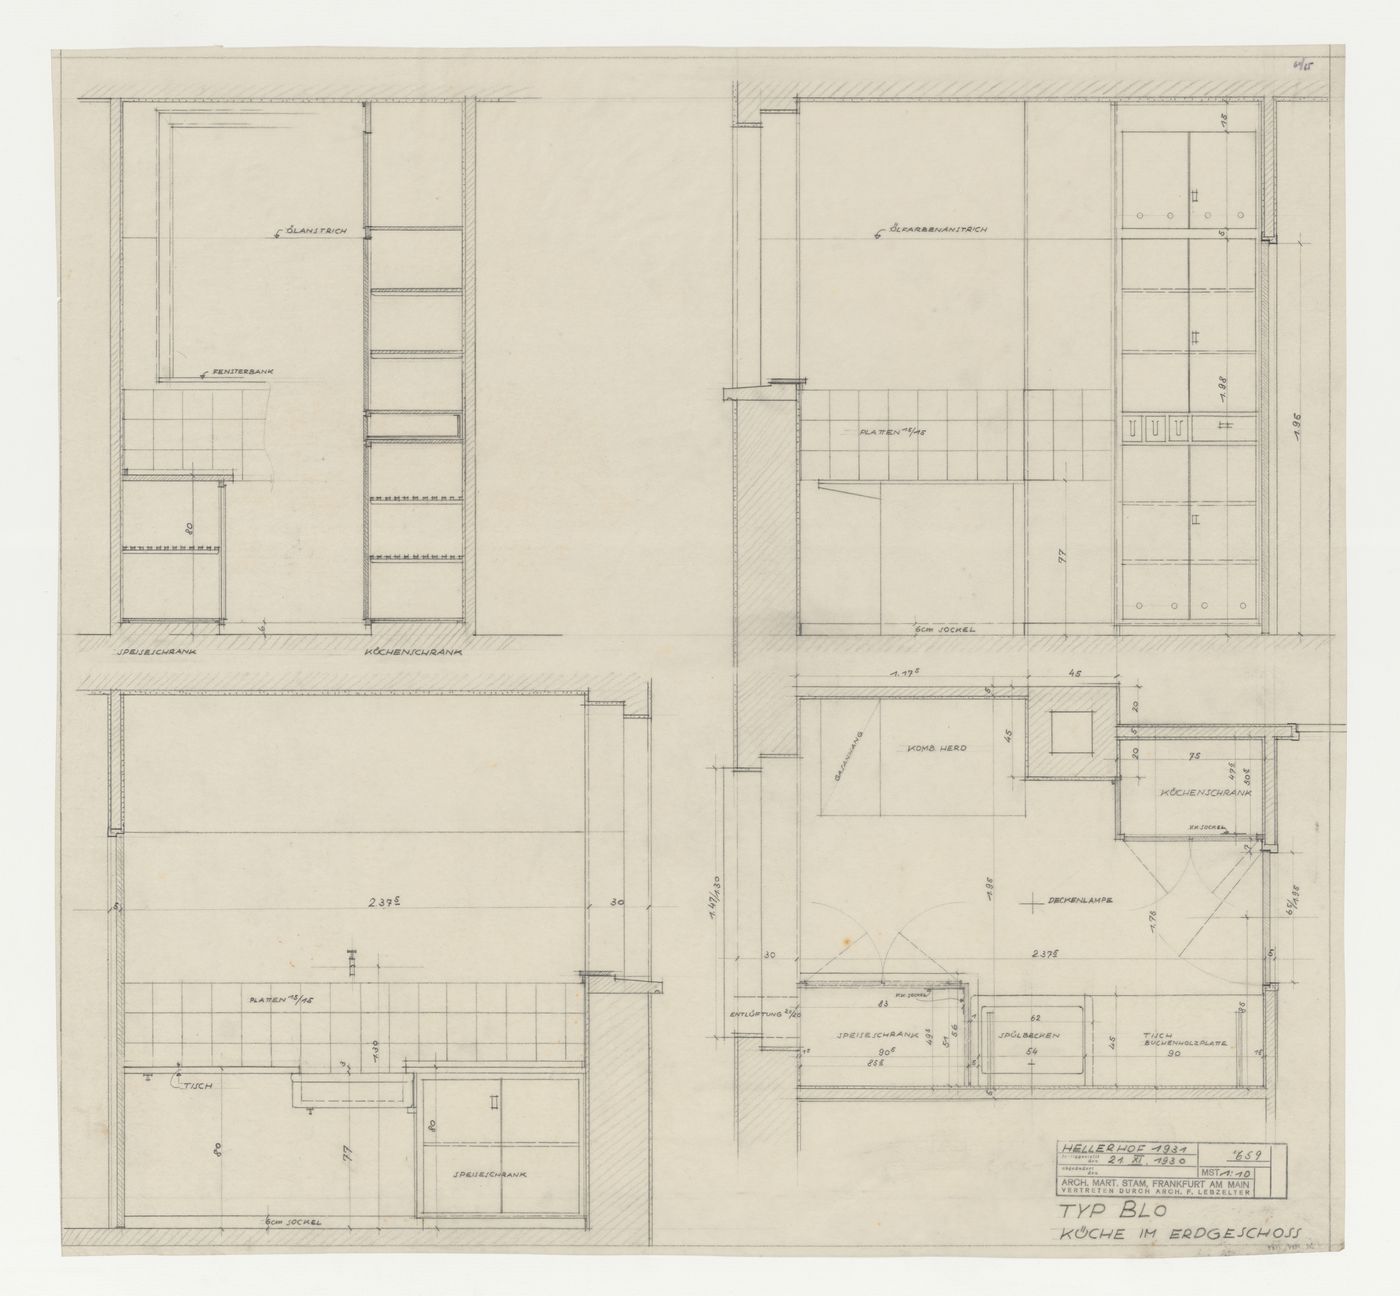 Ground floor plan and elevations for a type BLO kitchen for housing unit, Hellerhof Housing Estate, Frankfurt am Main, Germany